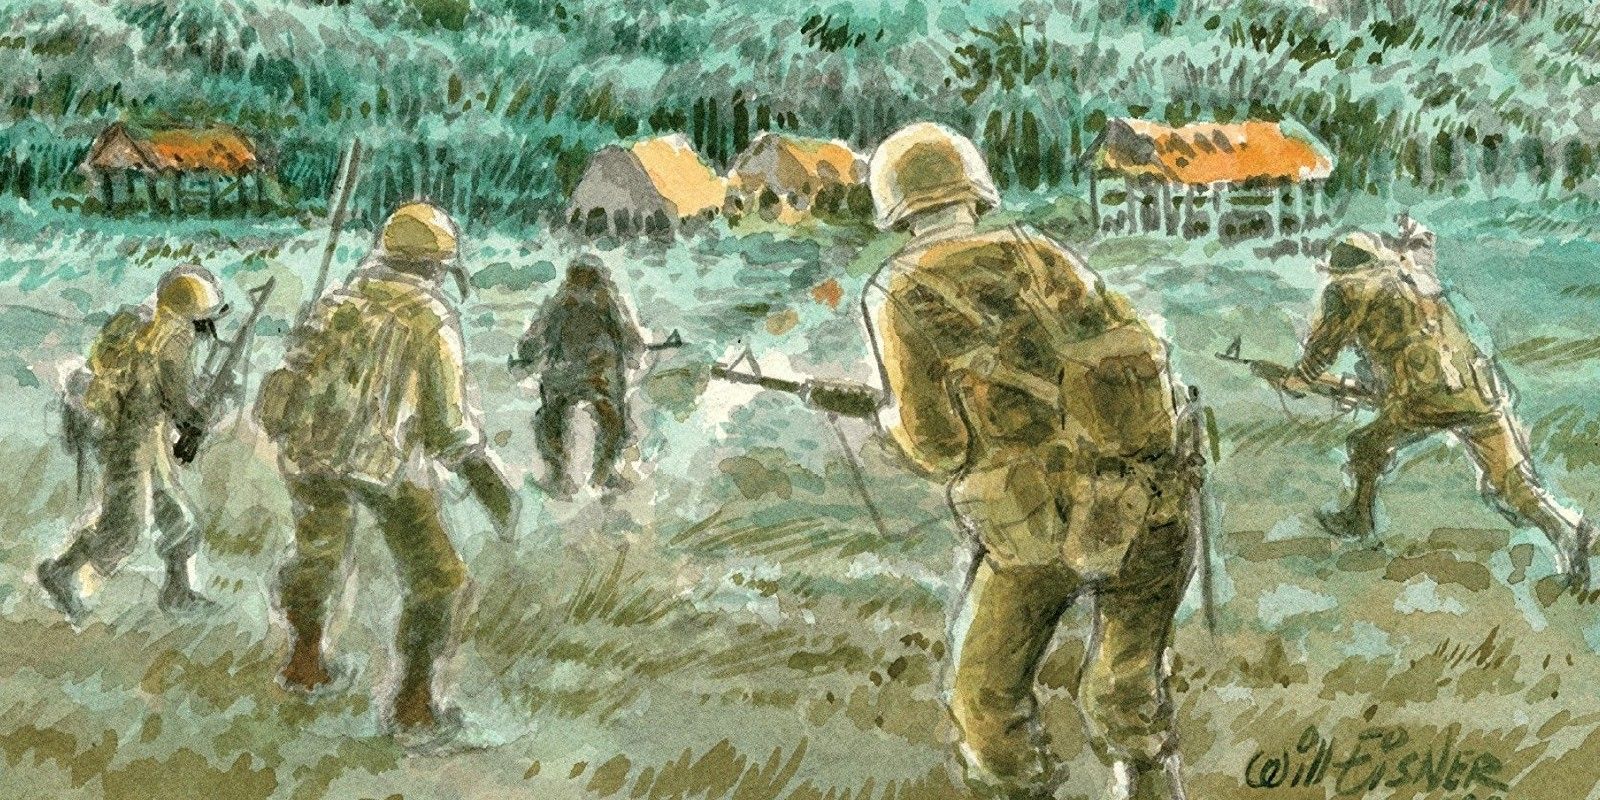 Soldiers walking through the grass